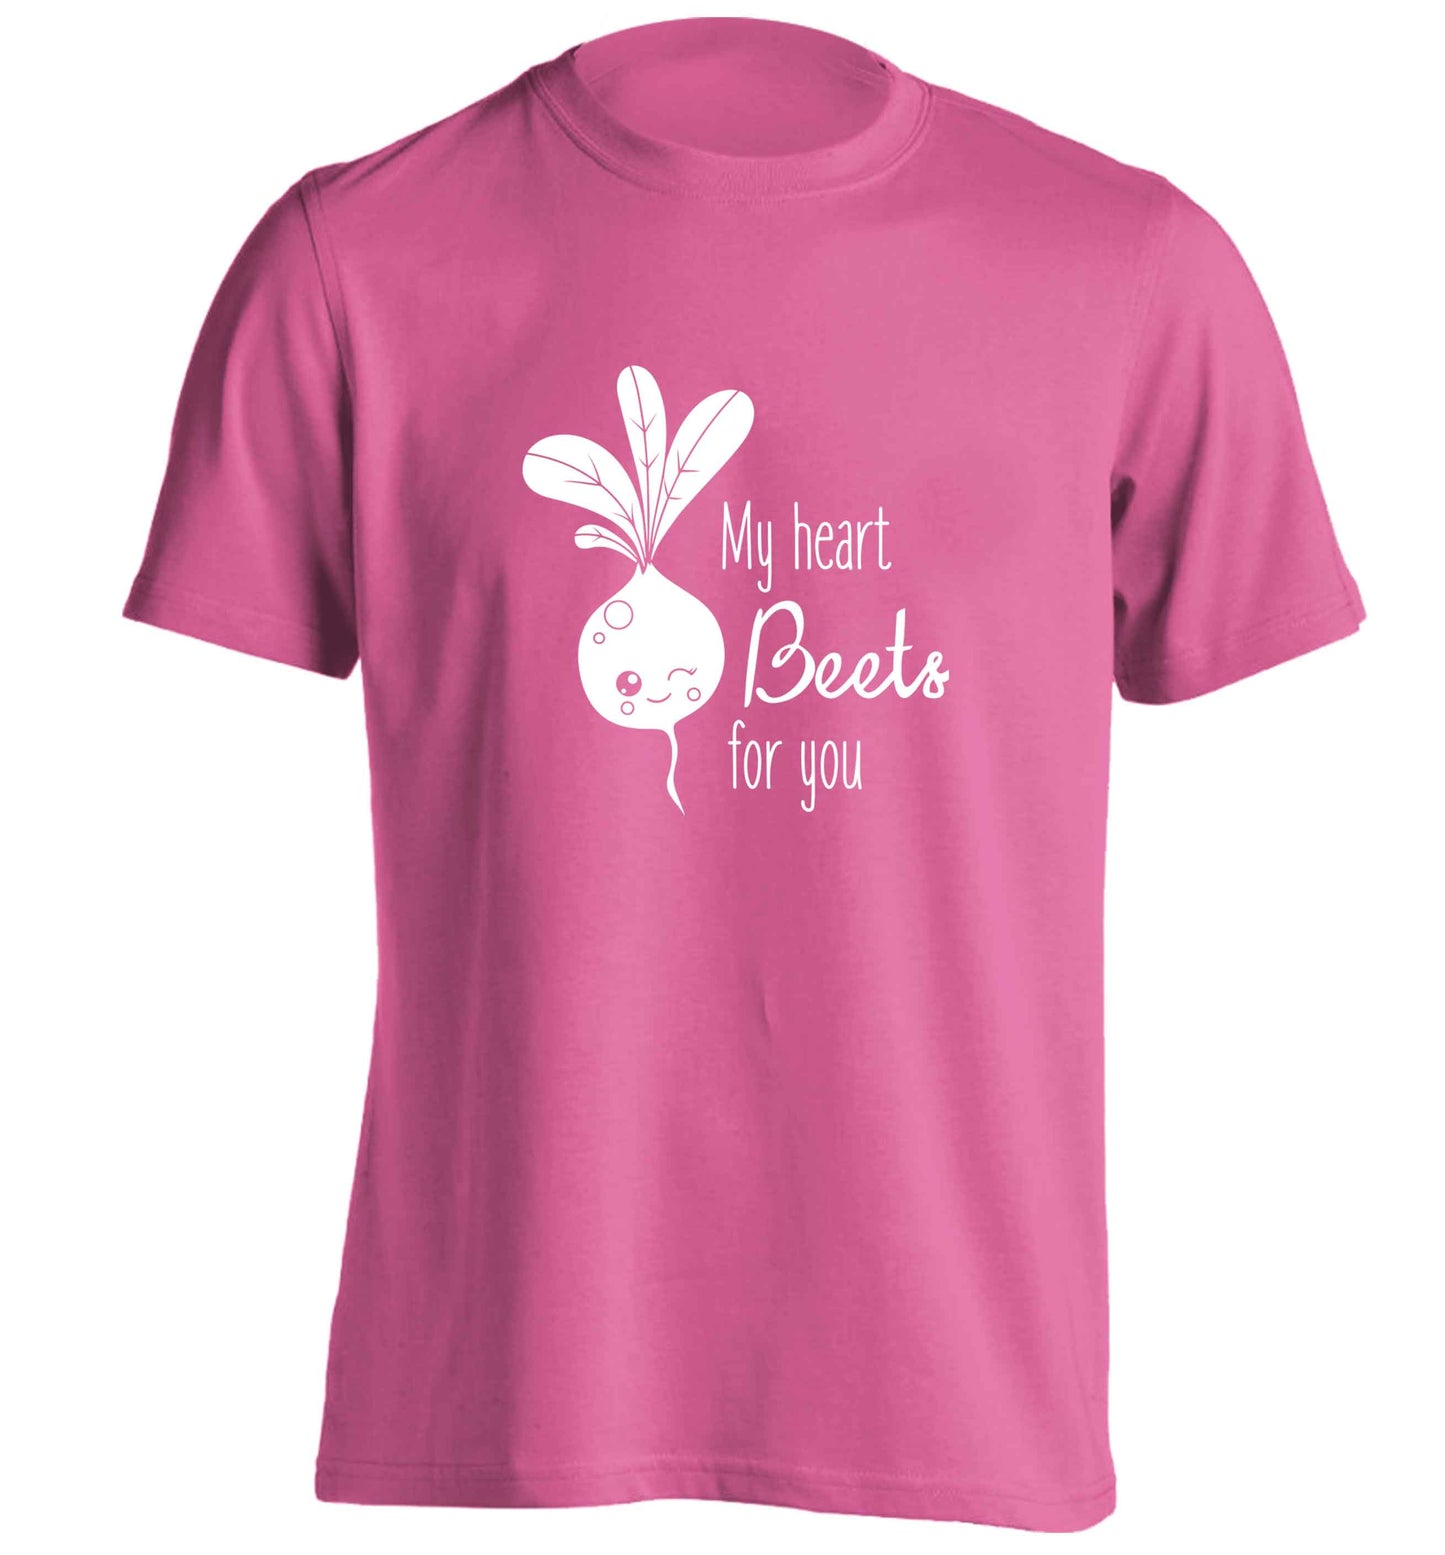 My heart beets for you adults unisex pink Tshirt 2XL